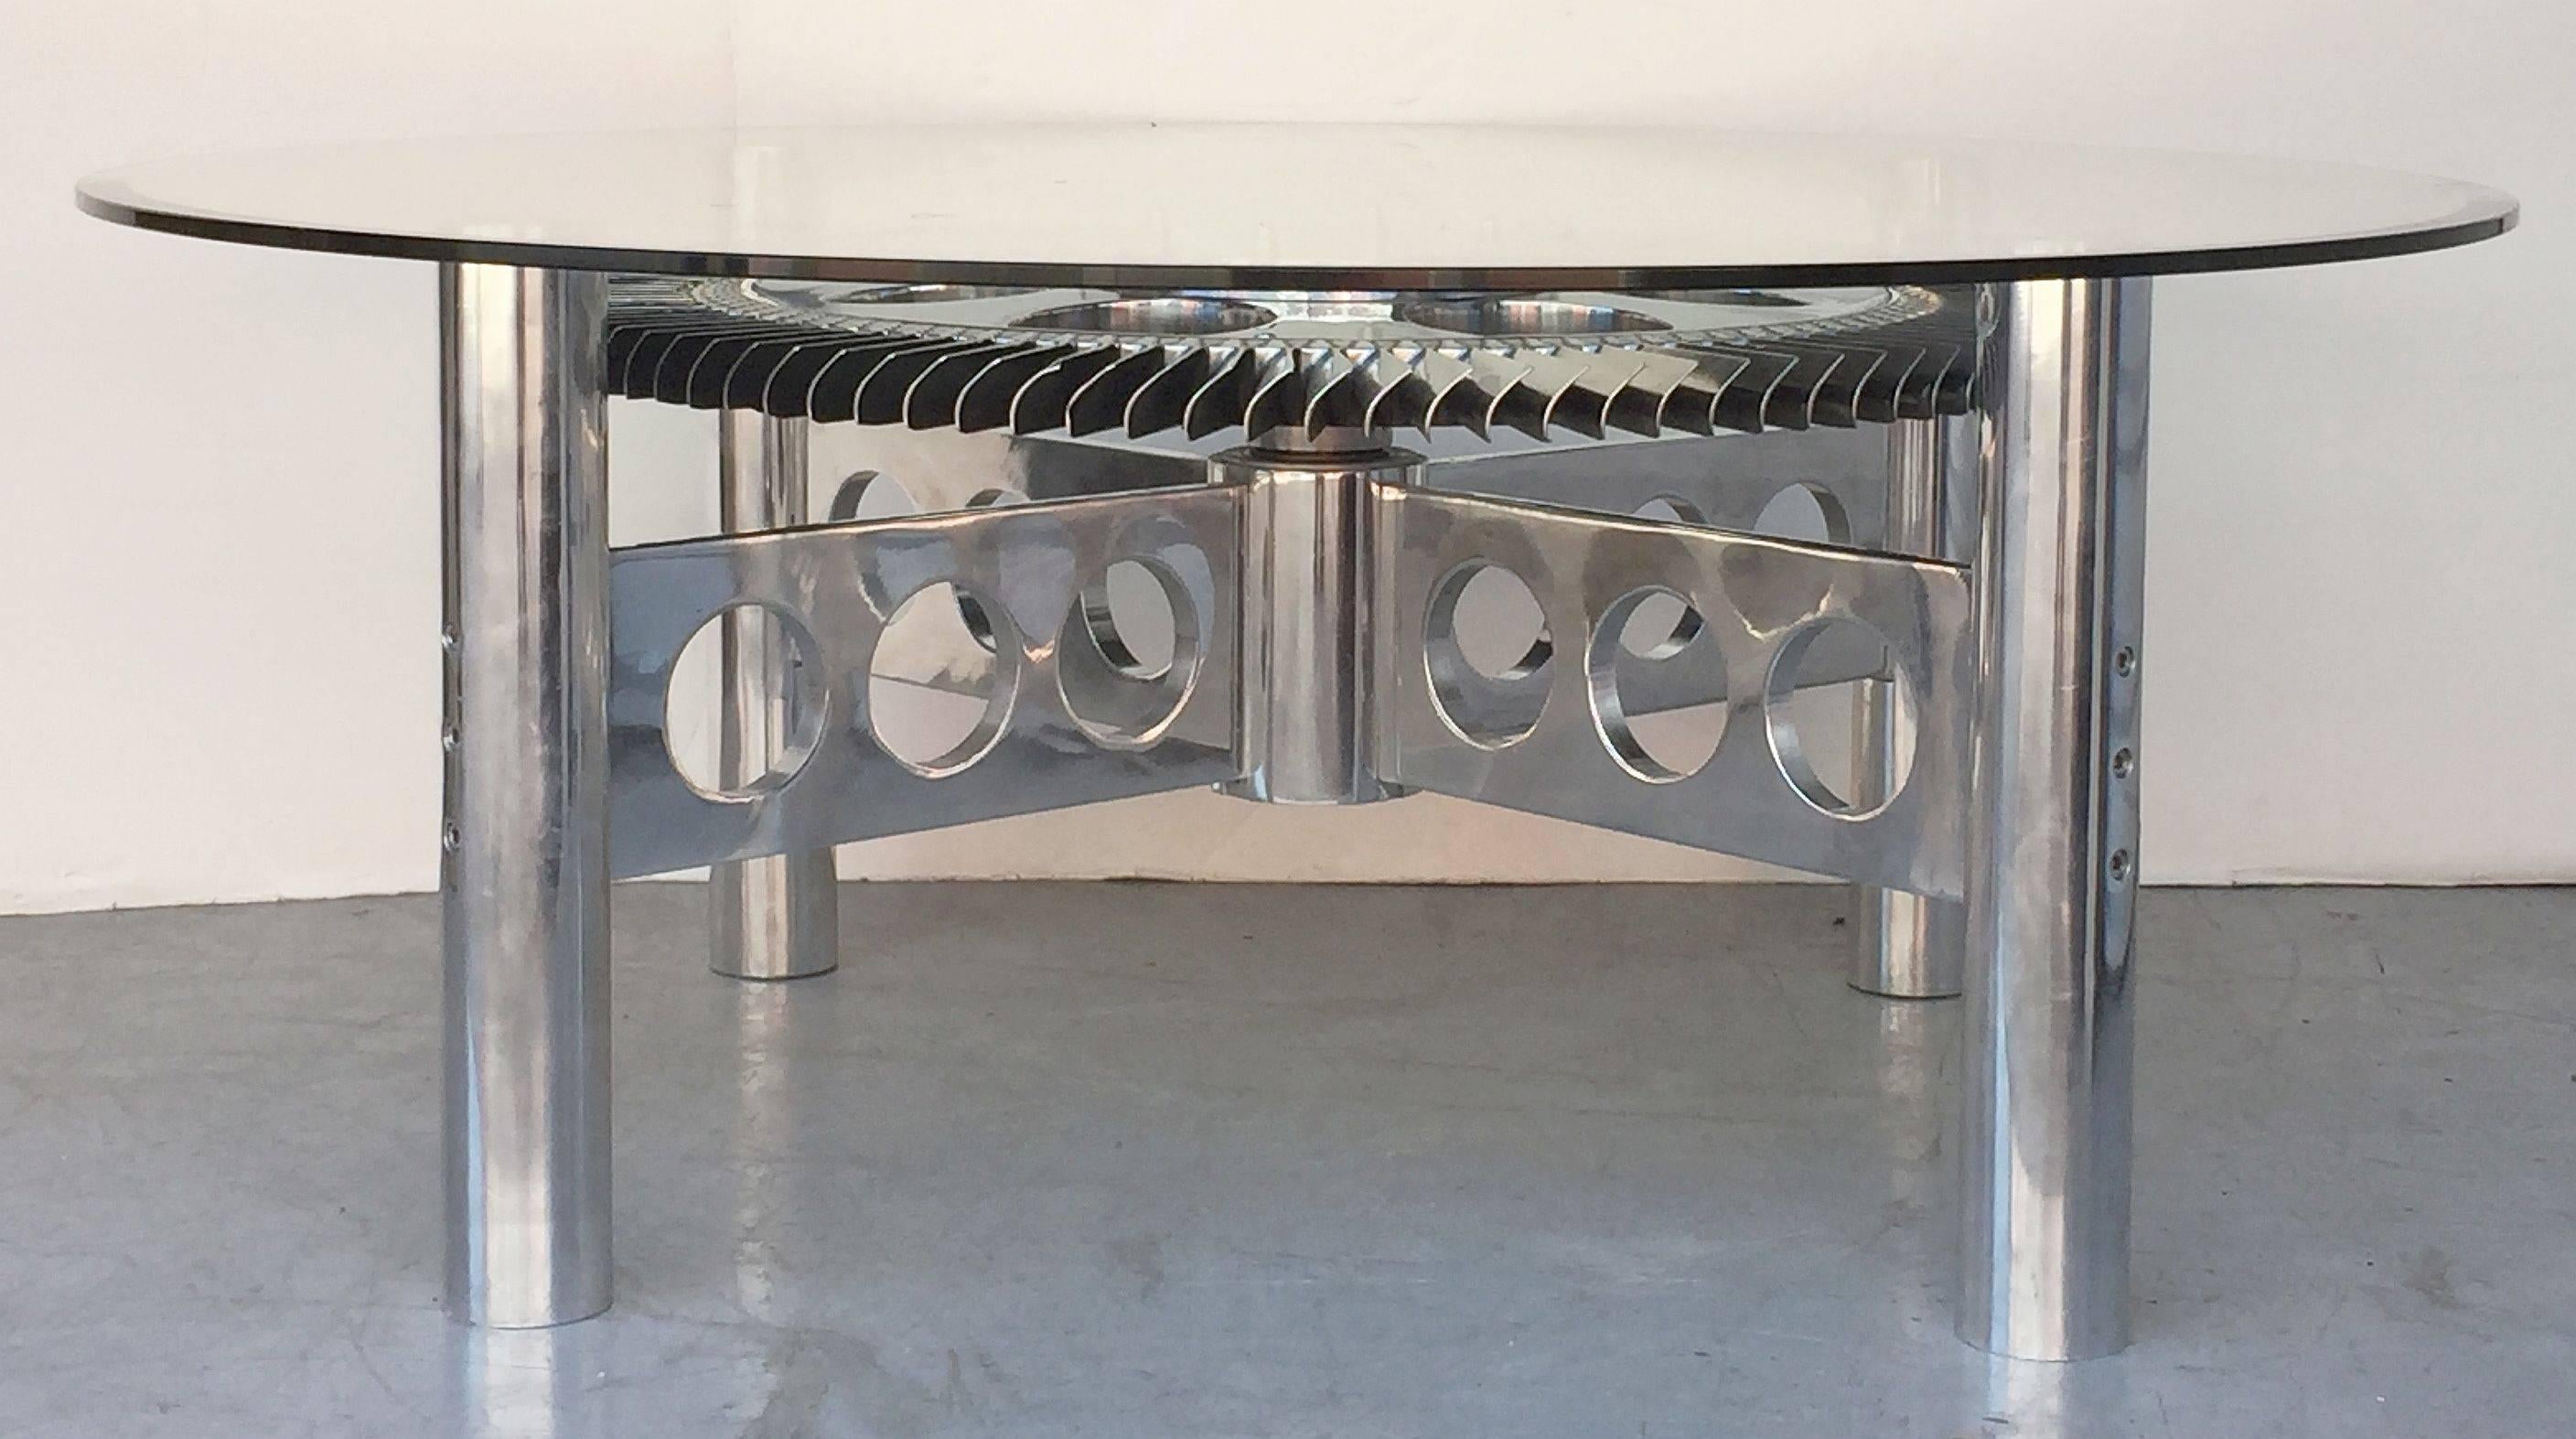 A stylish low cocktail or coffee table from England featuring a round glass top (48" diameter) with a beveled edge set upon base with an authentic Rolls Royce rotating impeller from a British military jet engine, mounted to a four-post frame of